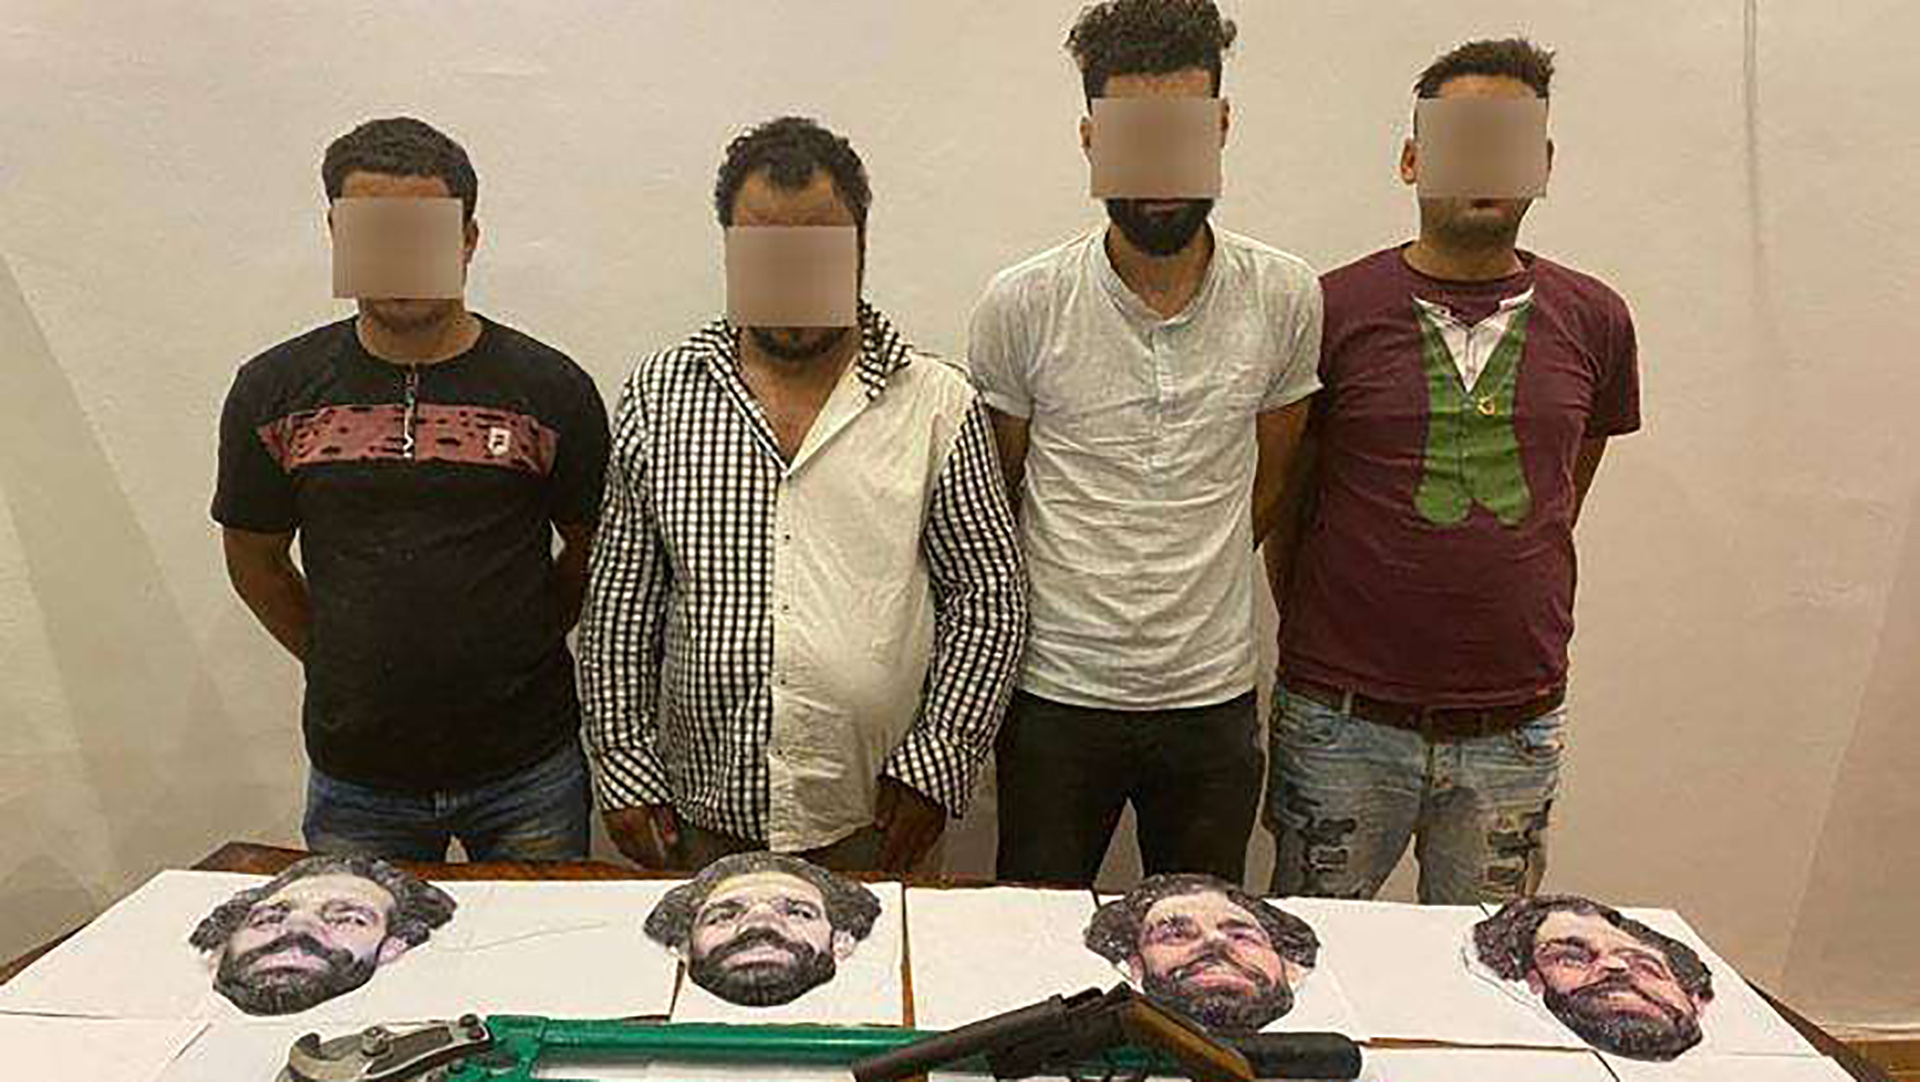 Salah mask-wearing robbers caught by Egyptian police